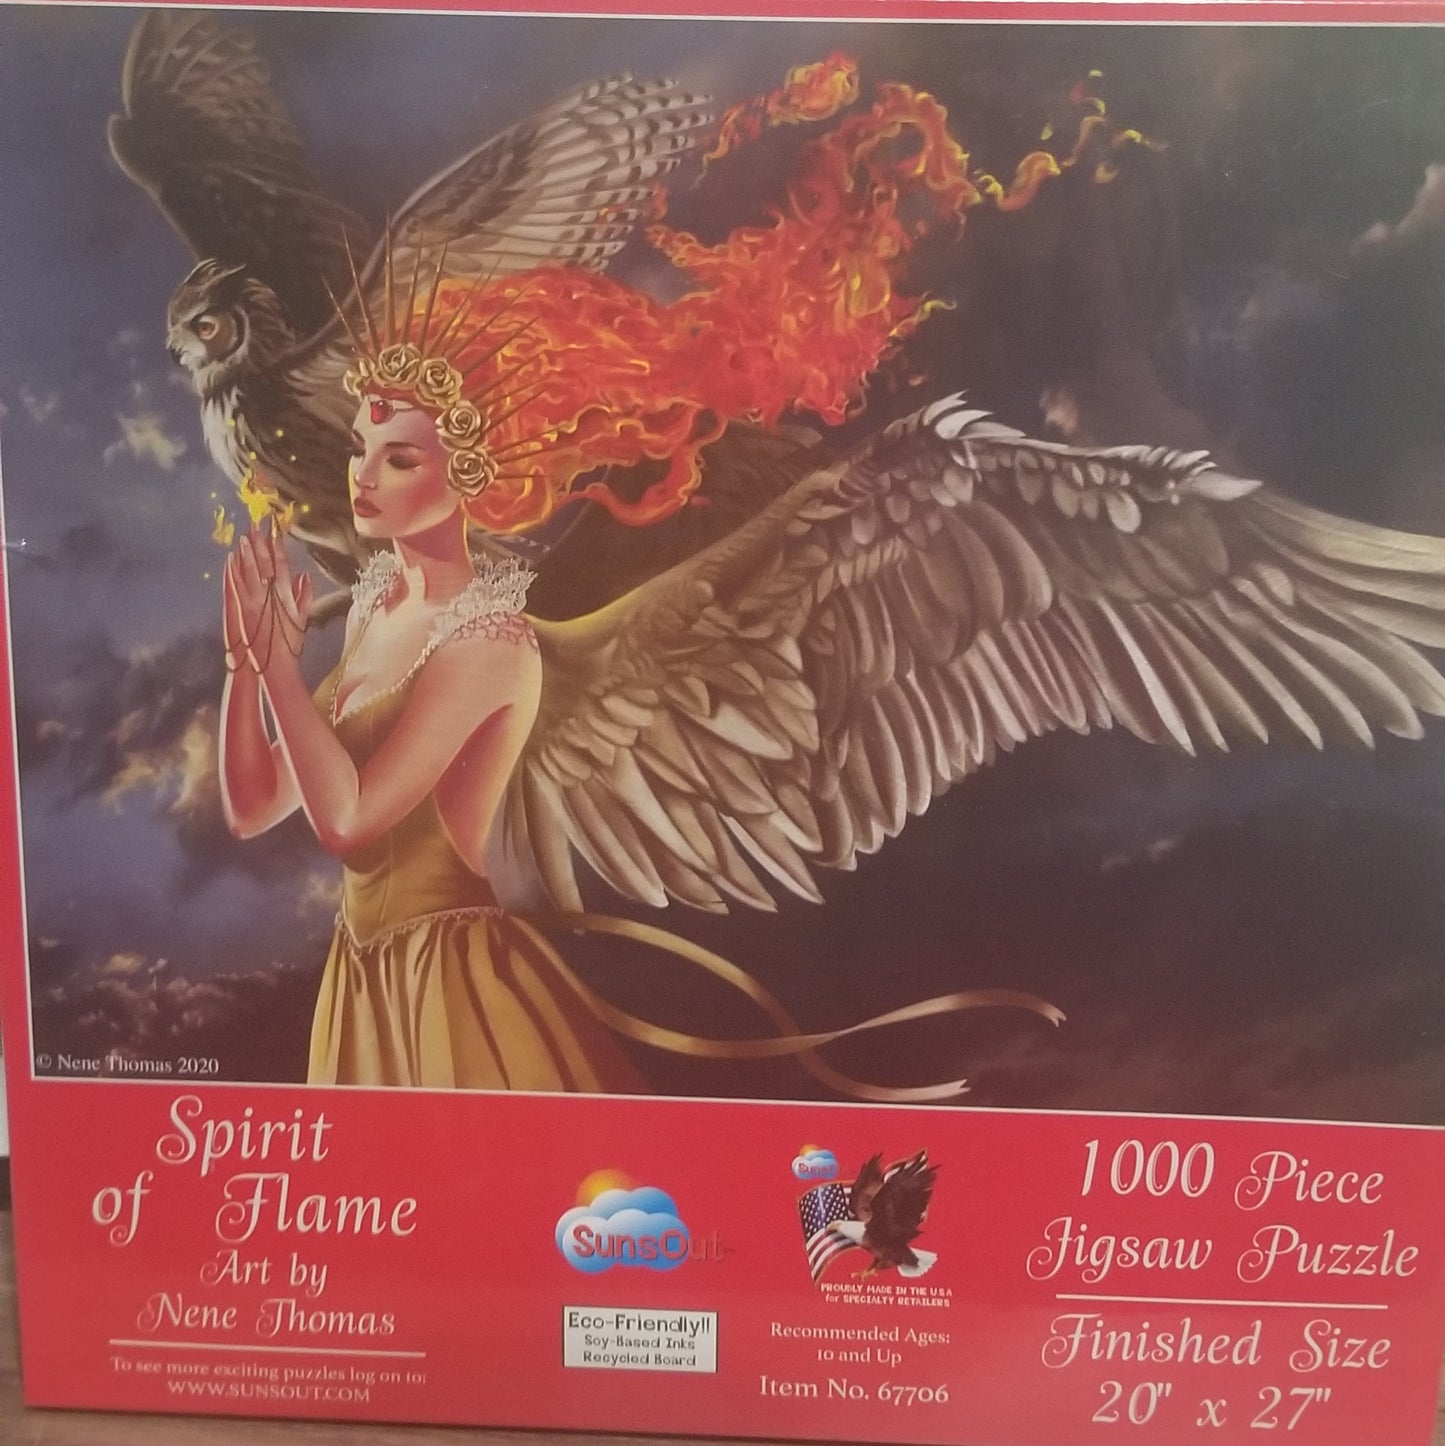 Spirit of Flame by Nene Thomas, 1000 Piece Puzzle